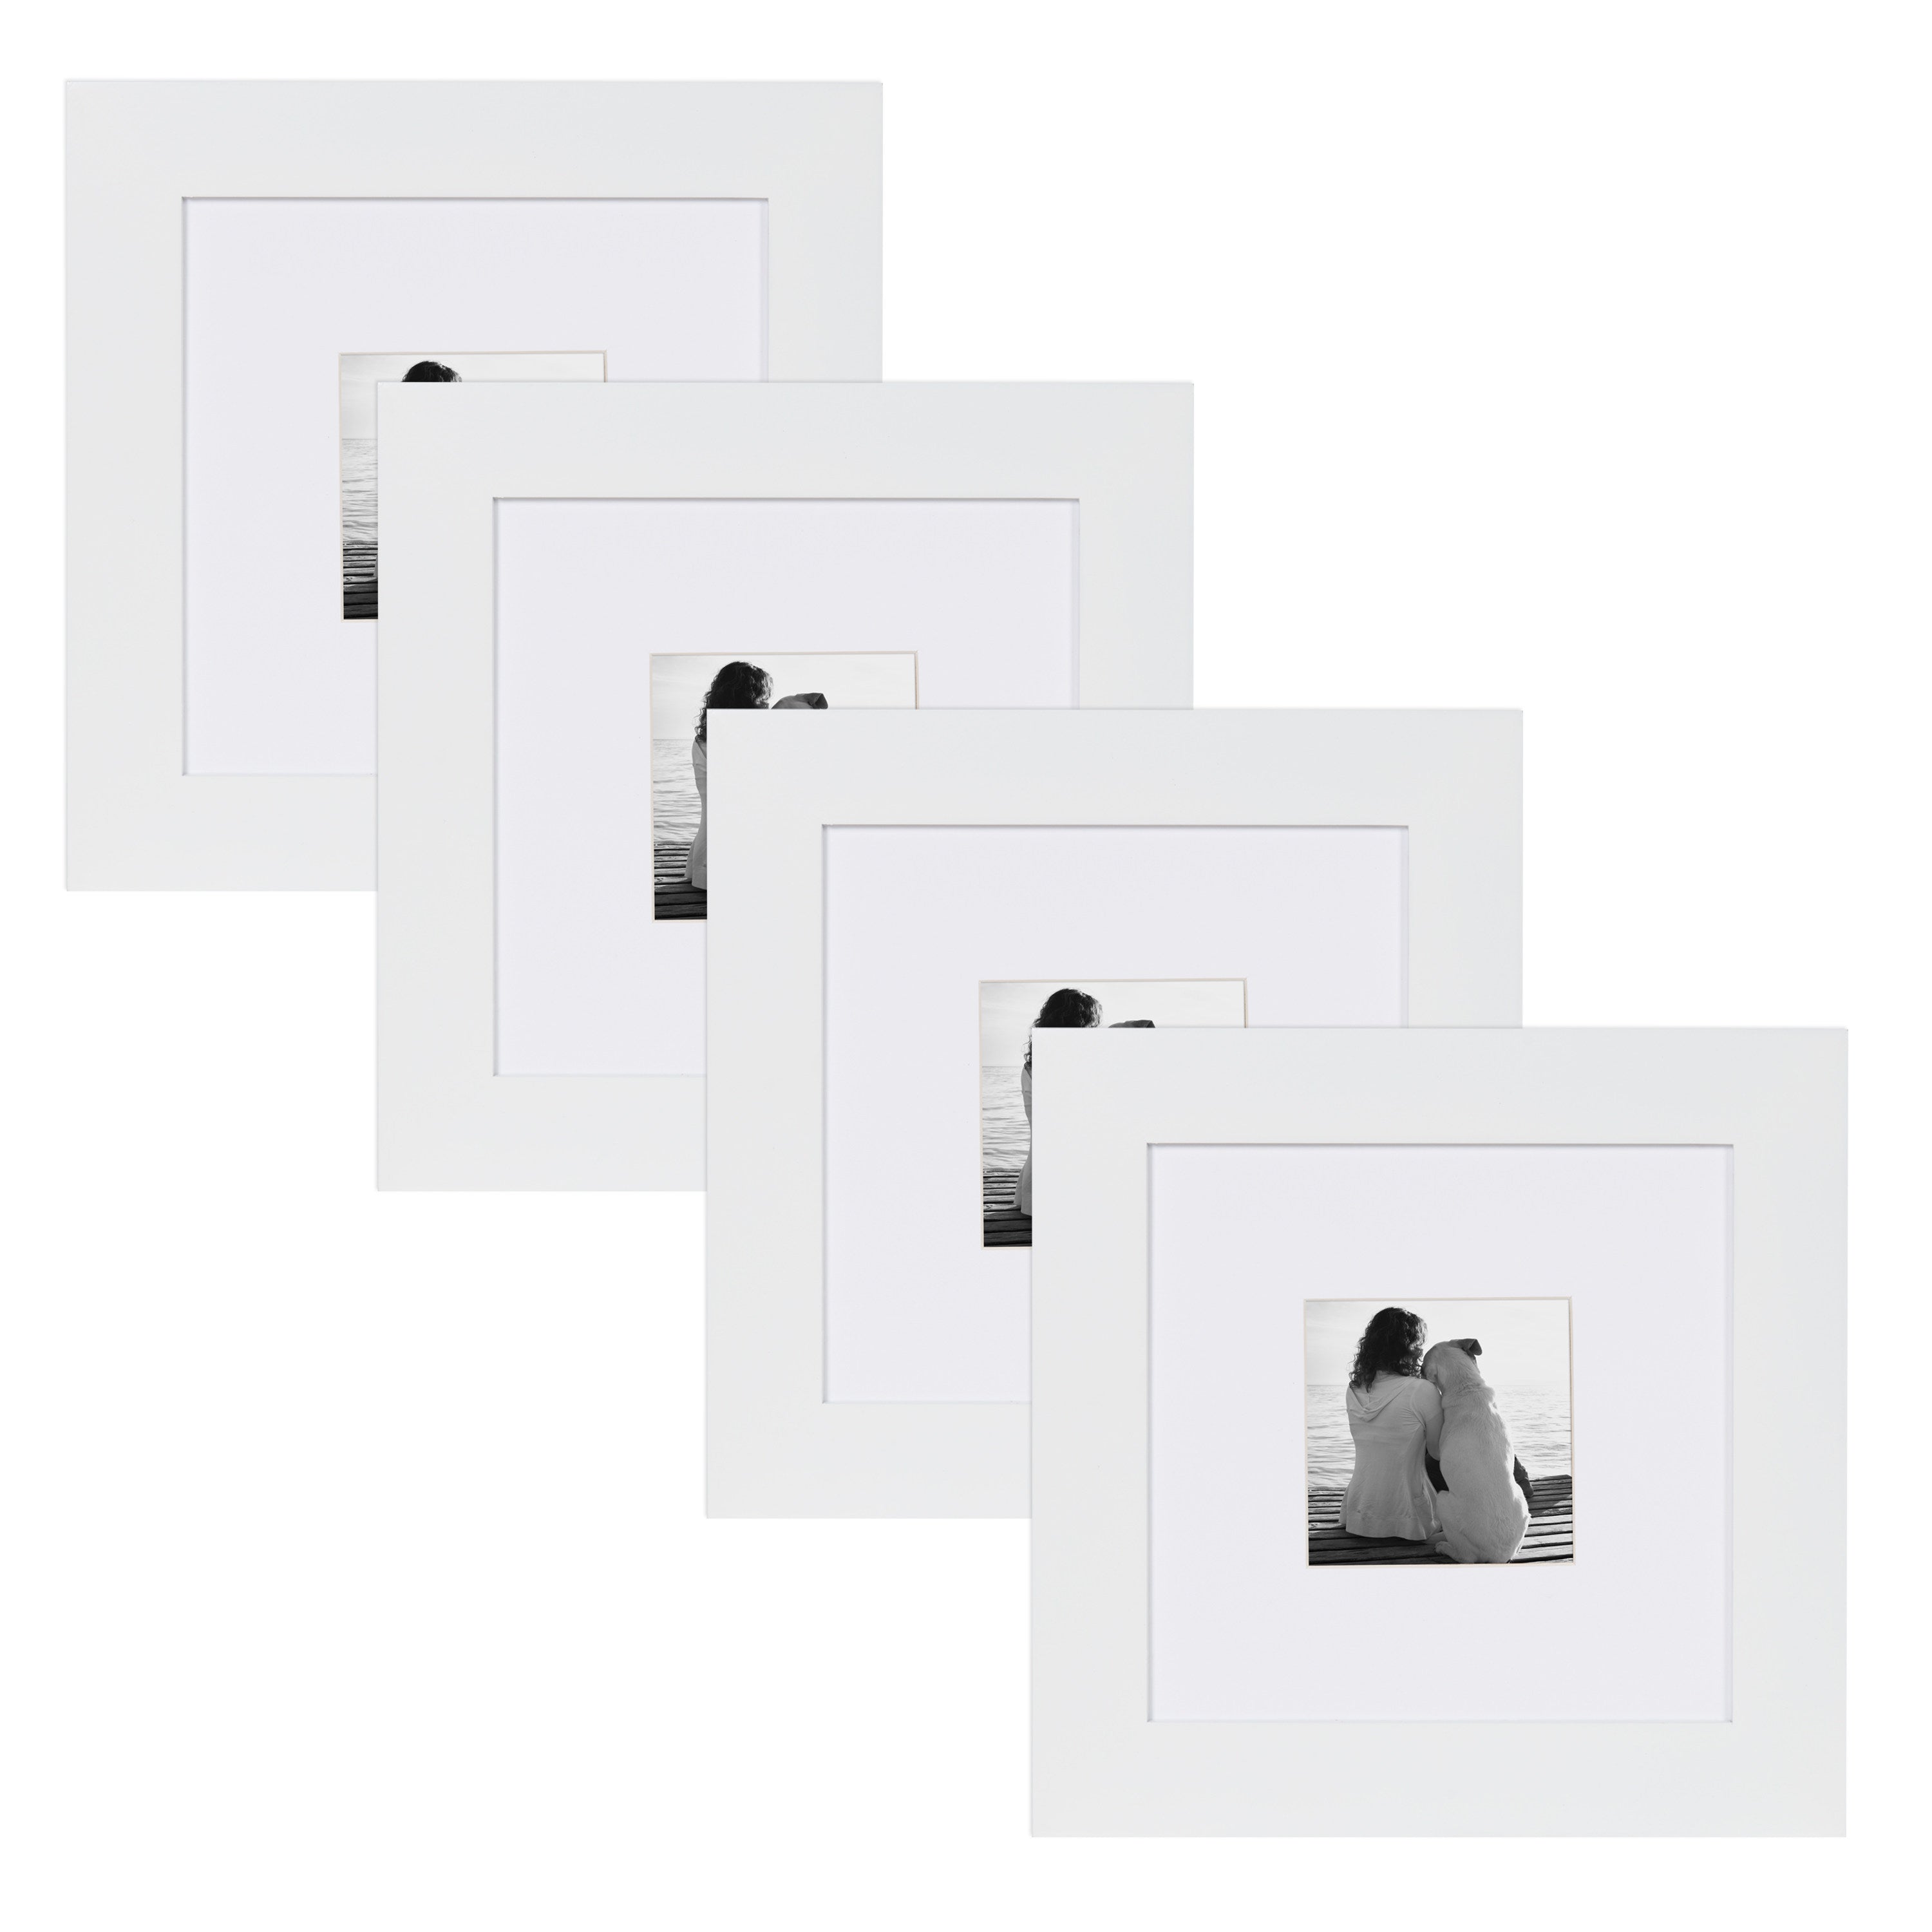 Museum 8x8 matted to 4x4 Wood Picture Frame, Set of 4